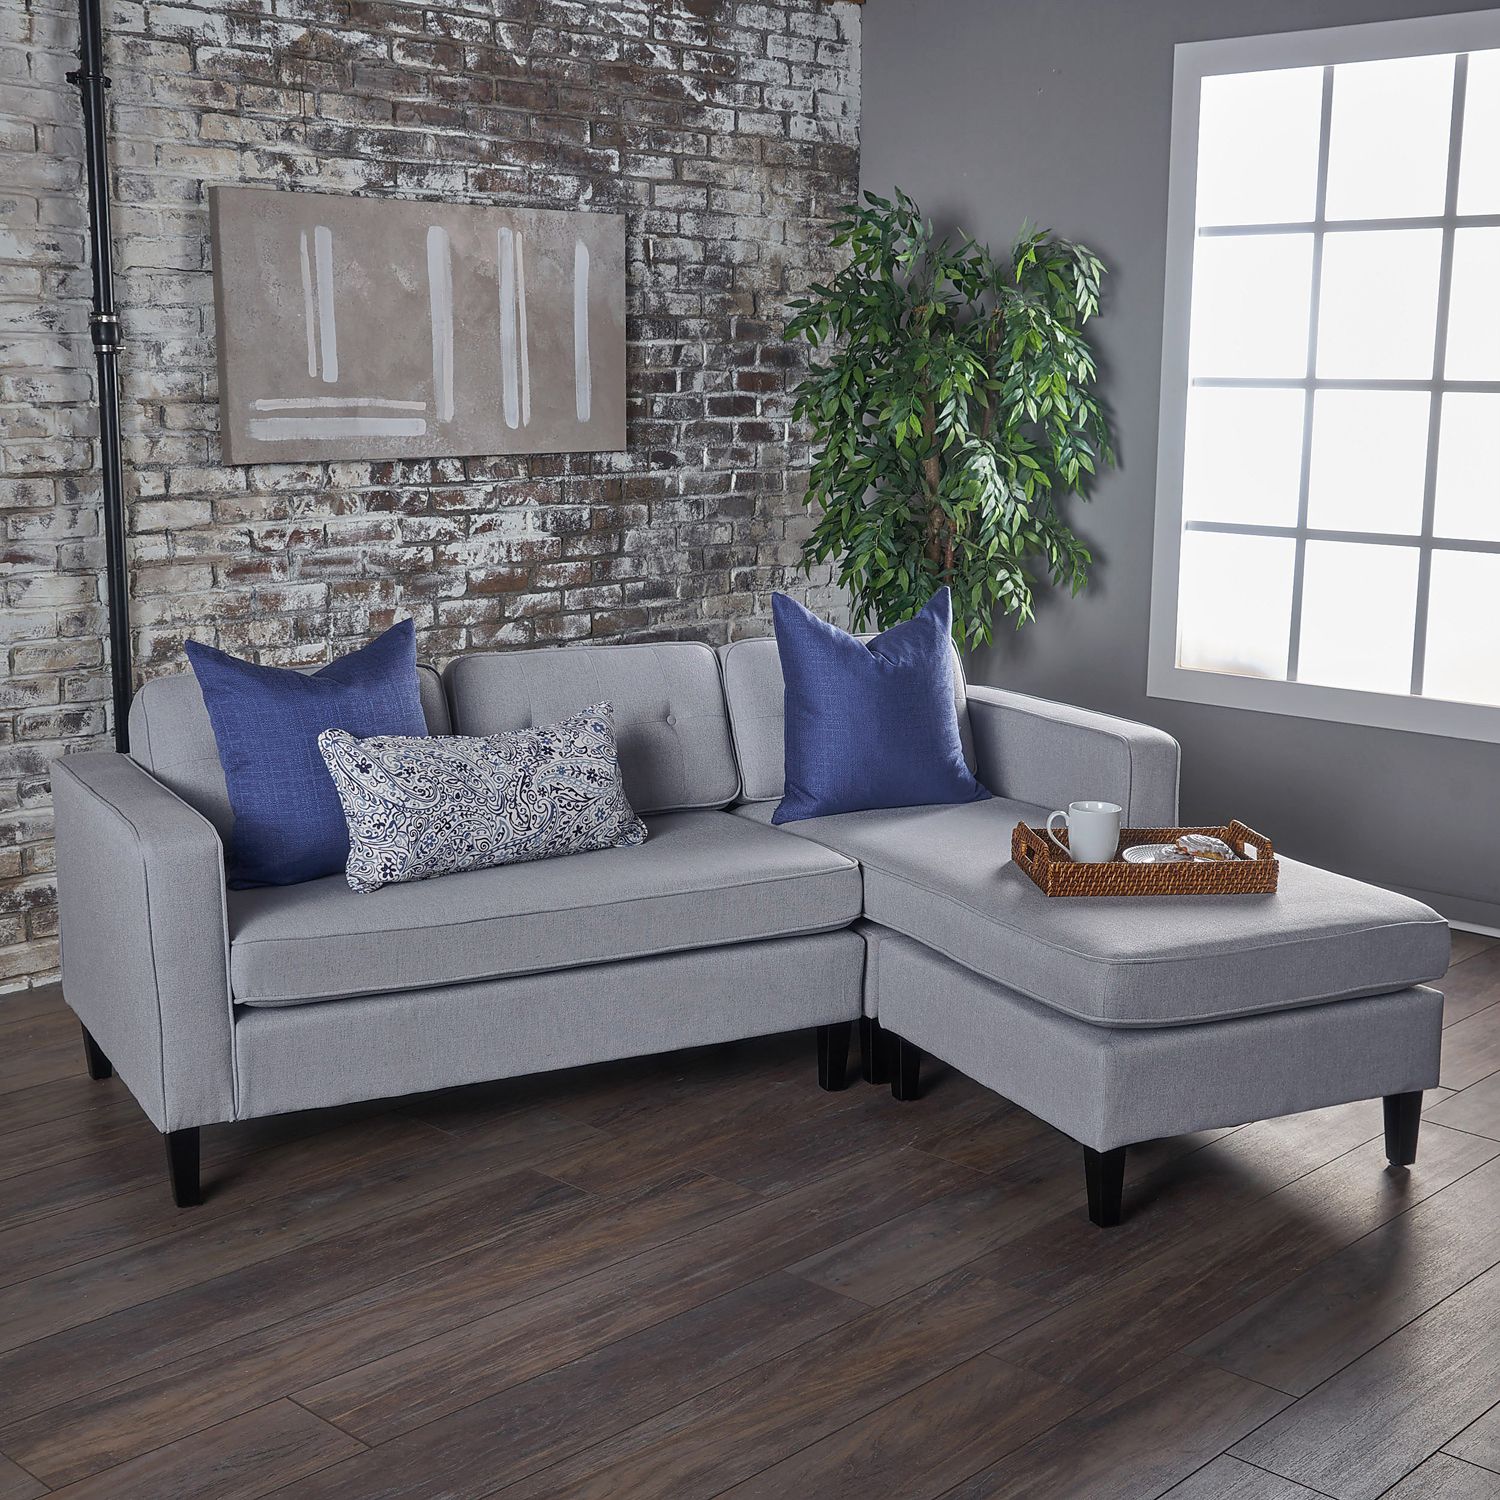 Light Gray Wilder Chaise Sectional Sofa – Pier1 With Regard To Sectional Sofas In Gray (View 4 of 15)